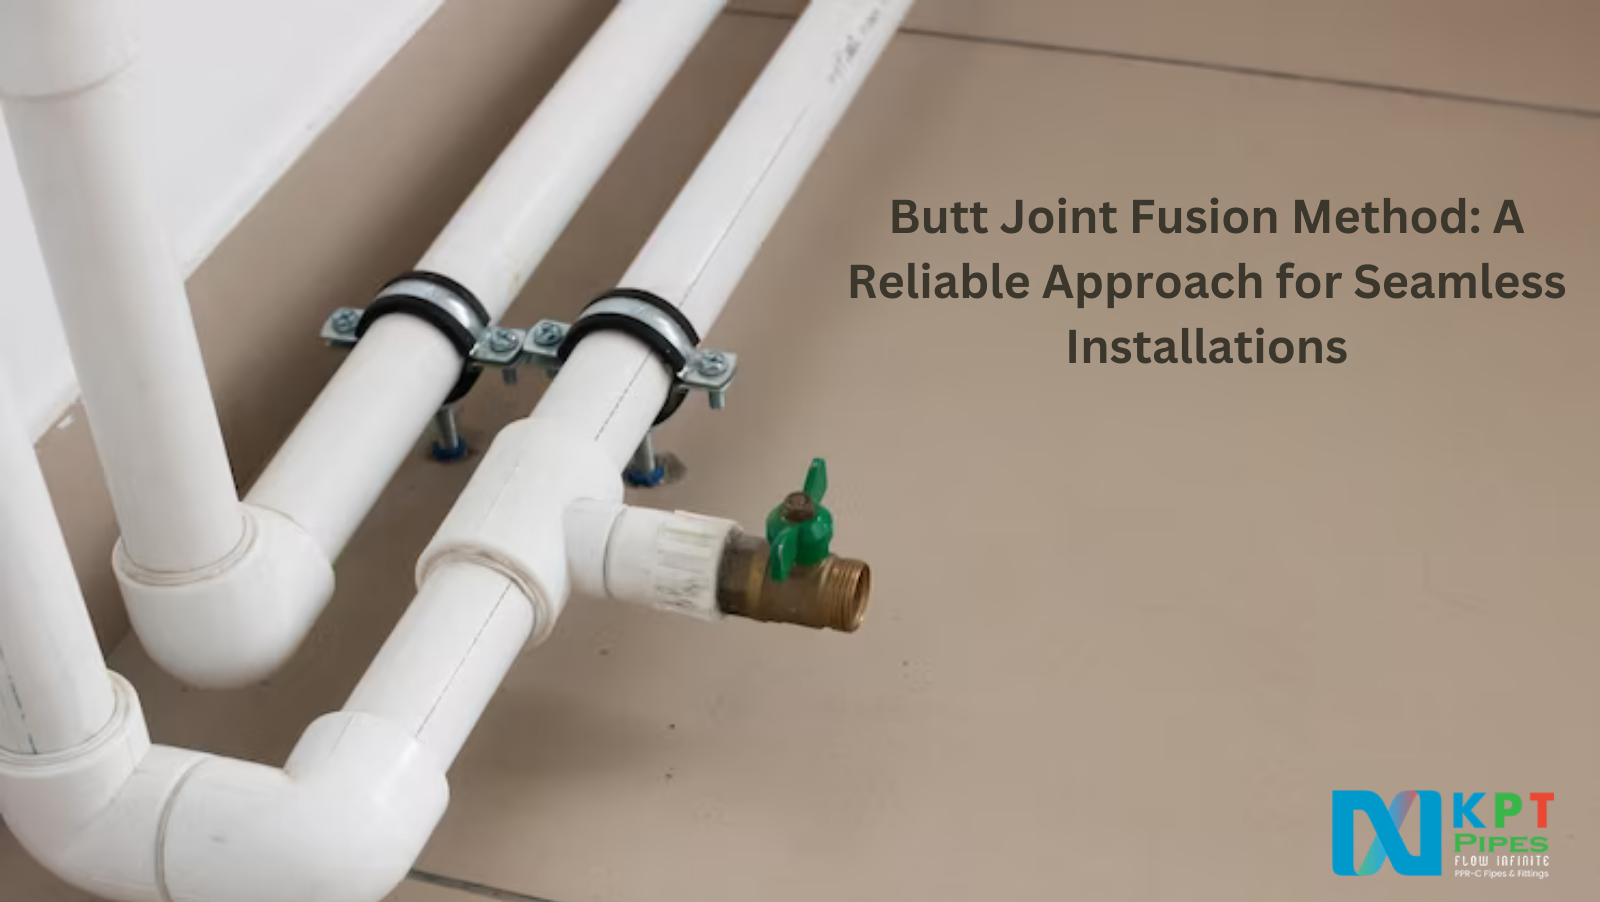 Butt-Joint-Fusion-Method-A-Reliable-Approach-for-Seamless-Installations